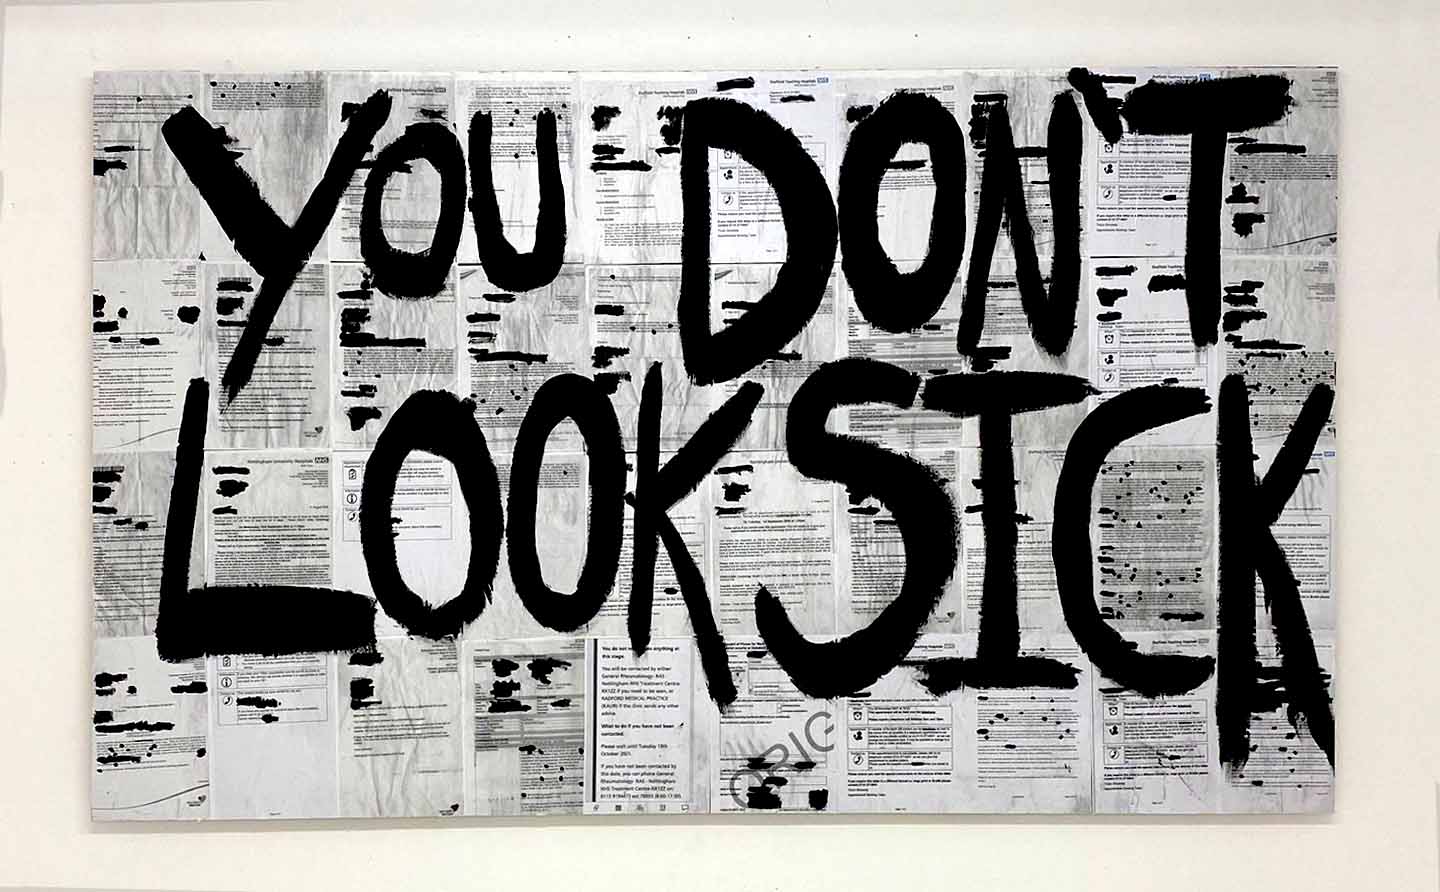 'You don't look sick' by Chloe Burns has had over 2,000 shares on social media